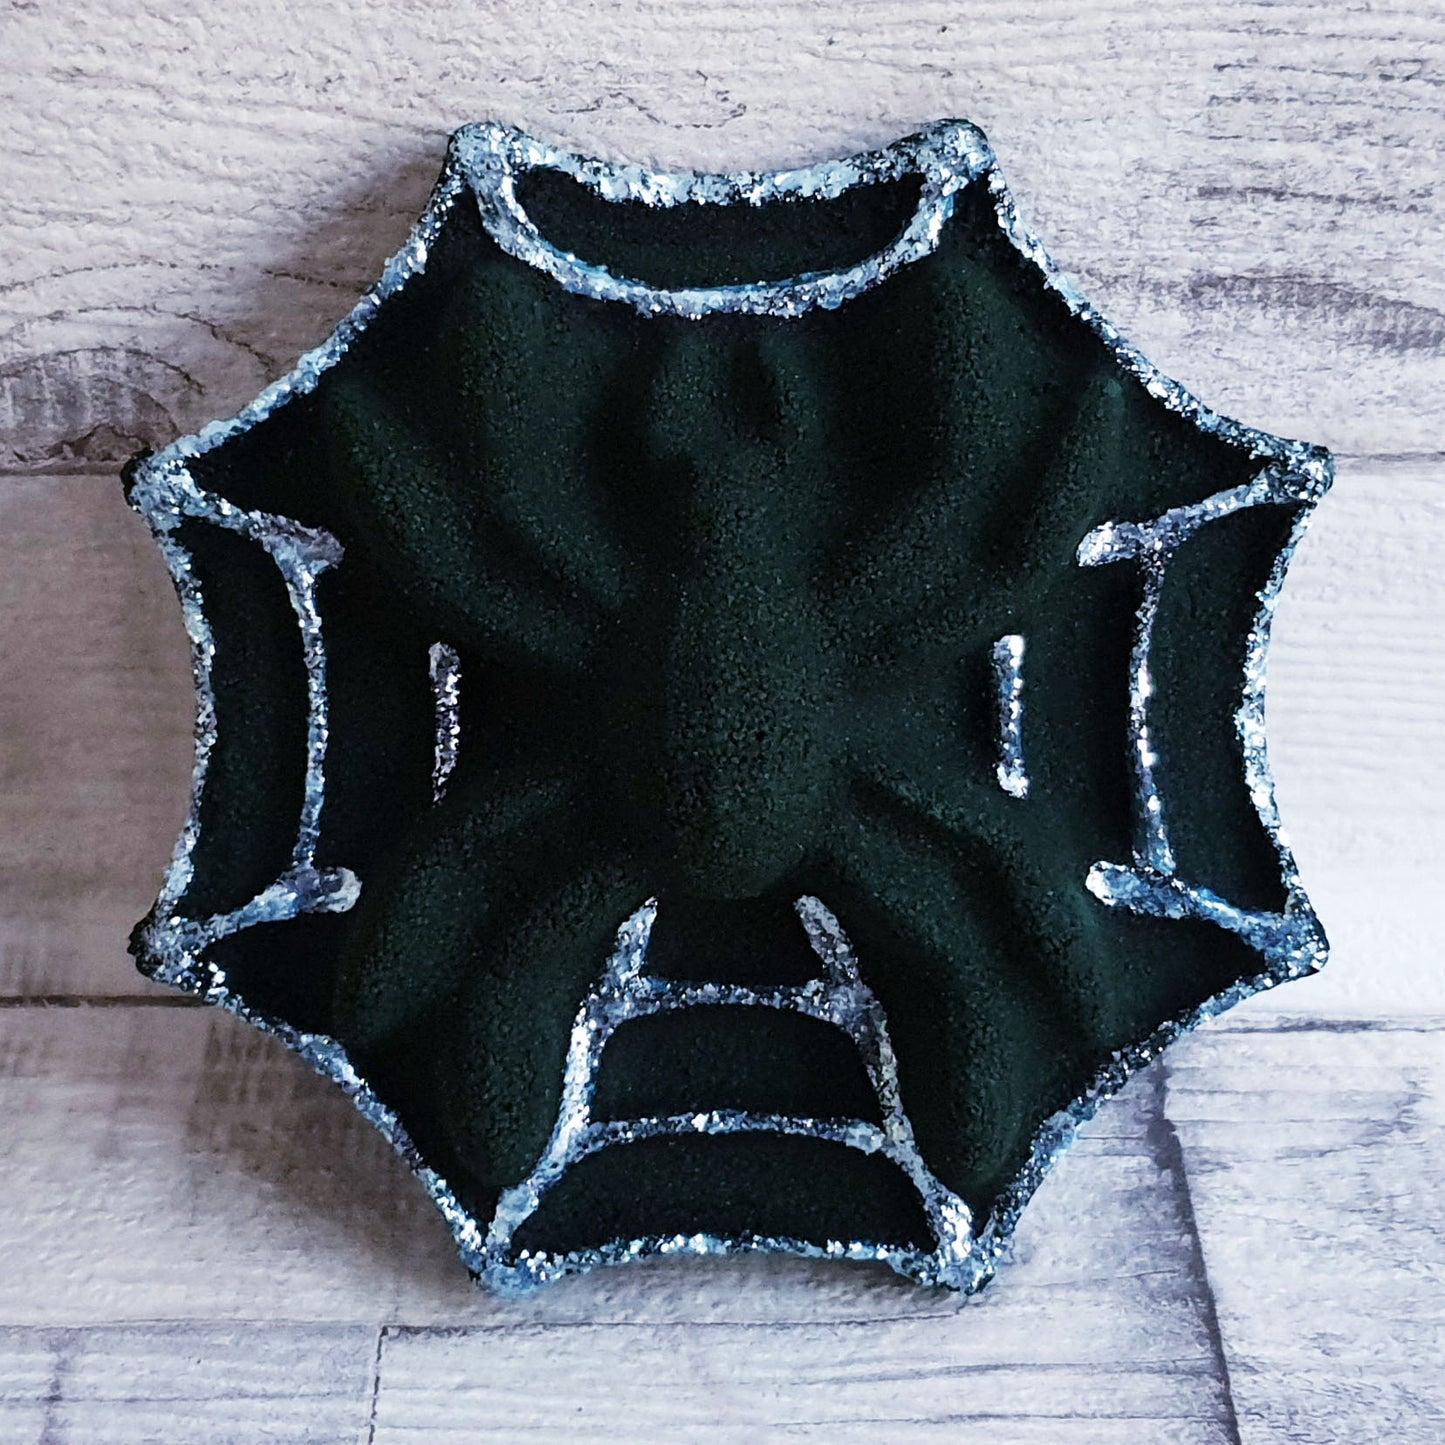 Spider Web Mould | Truly Personal | Bath Bomb, Soap, Resin, Chocolate, Jelly, Wax Melts Mold